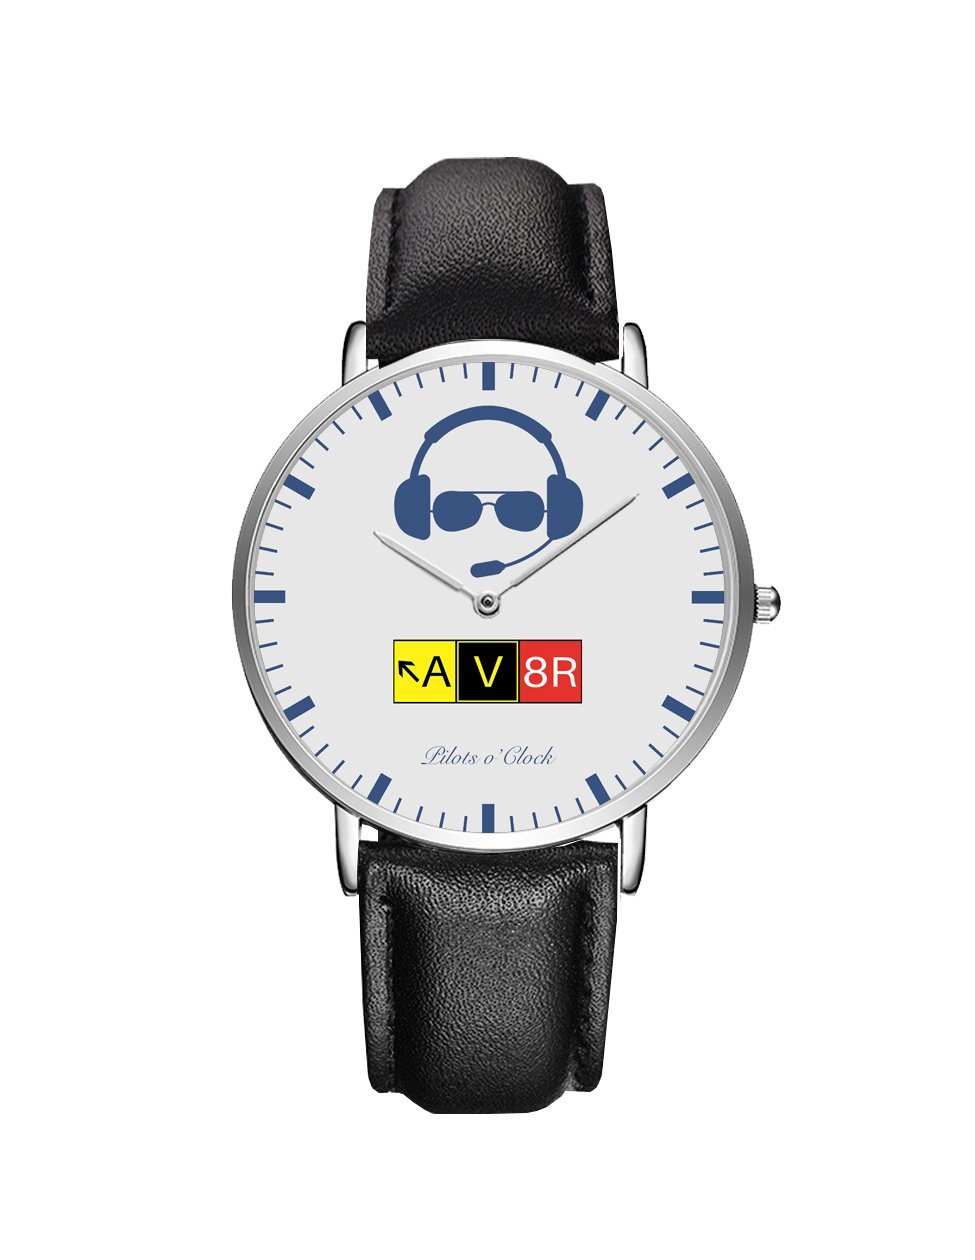 AV8R Leather Strap Watches Pilot Eyes Store Silver & Black Leather Strap 